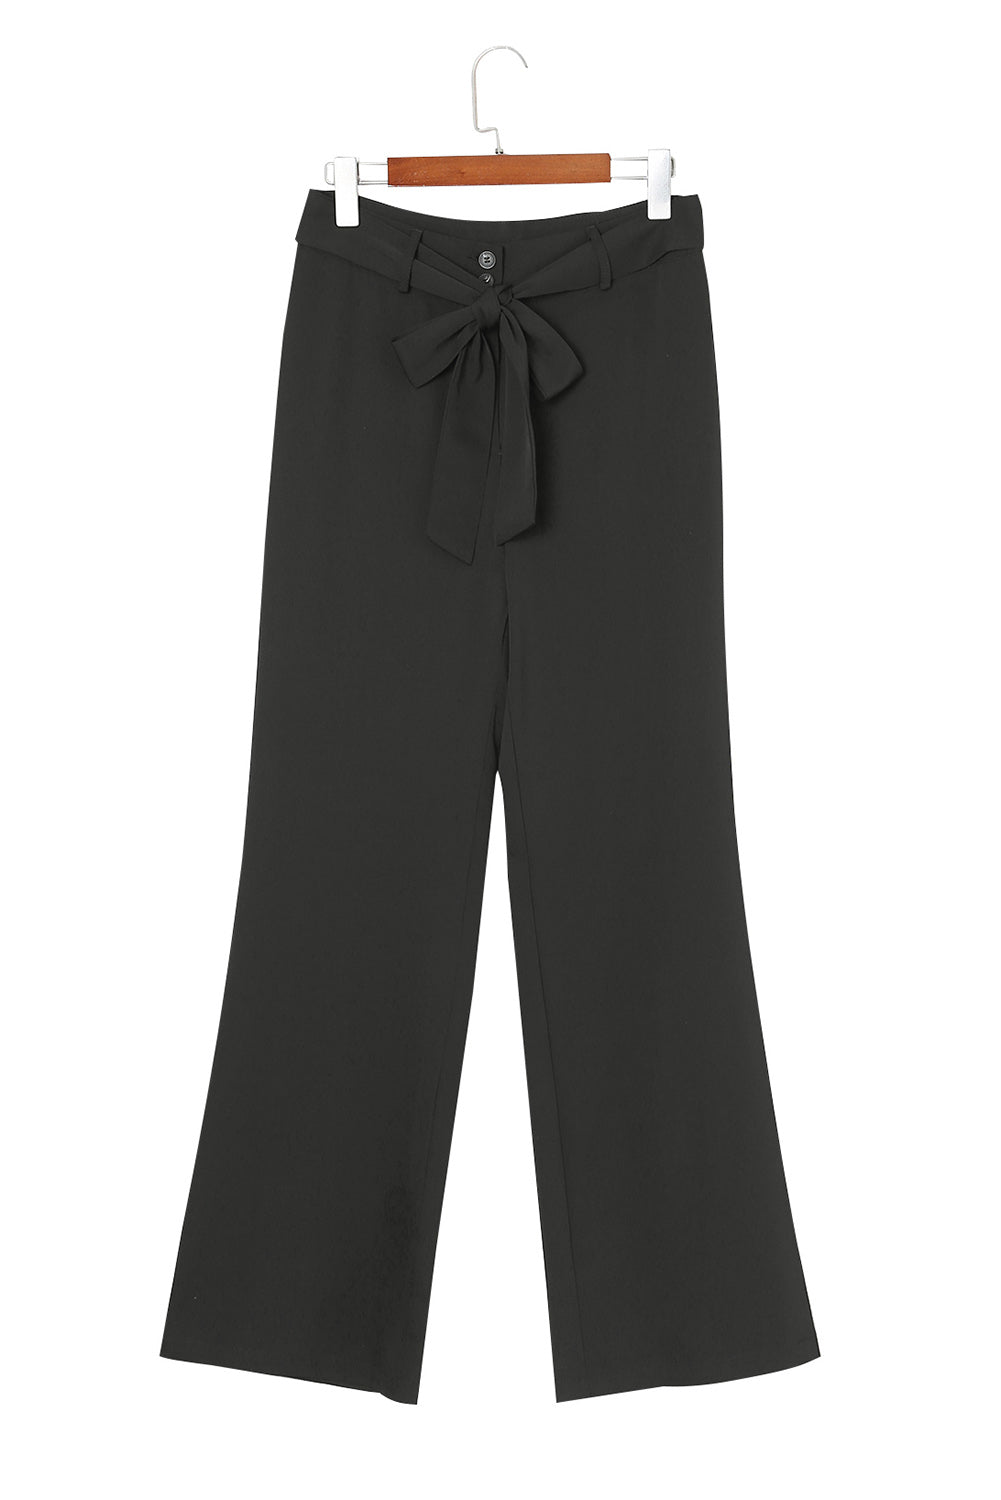 Belted Wide Leg High Waisted Pants